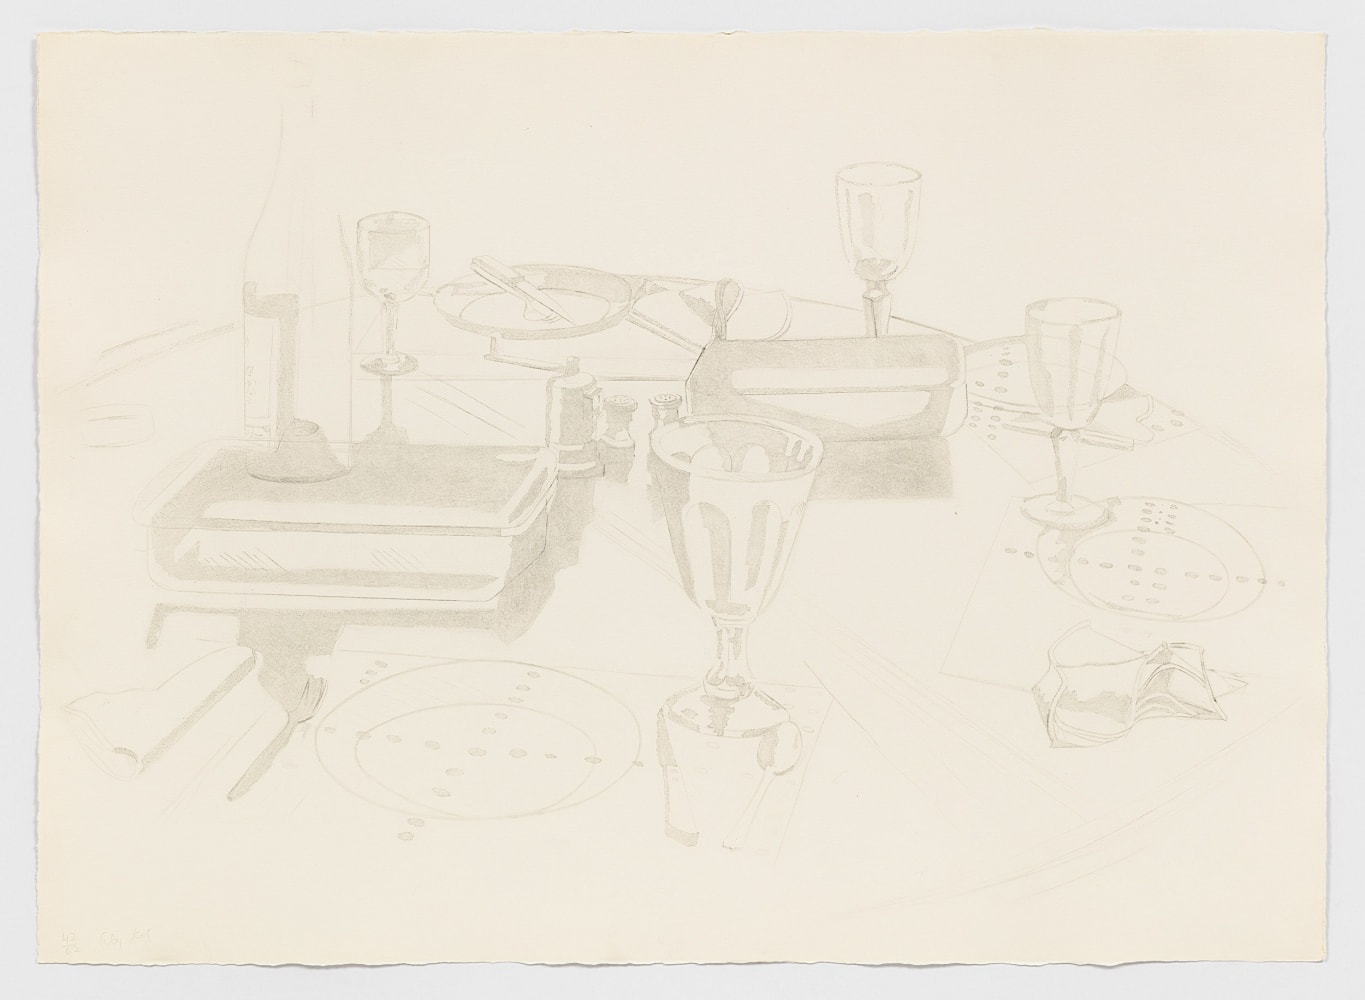 Still Life, 1974

aquatint and drypoint, edition of 62

22 1/8 x 30 3/4 in. / 56.2 x 78.1 cm